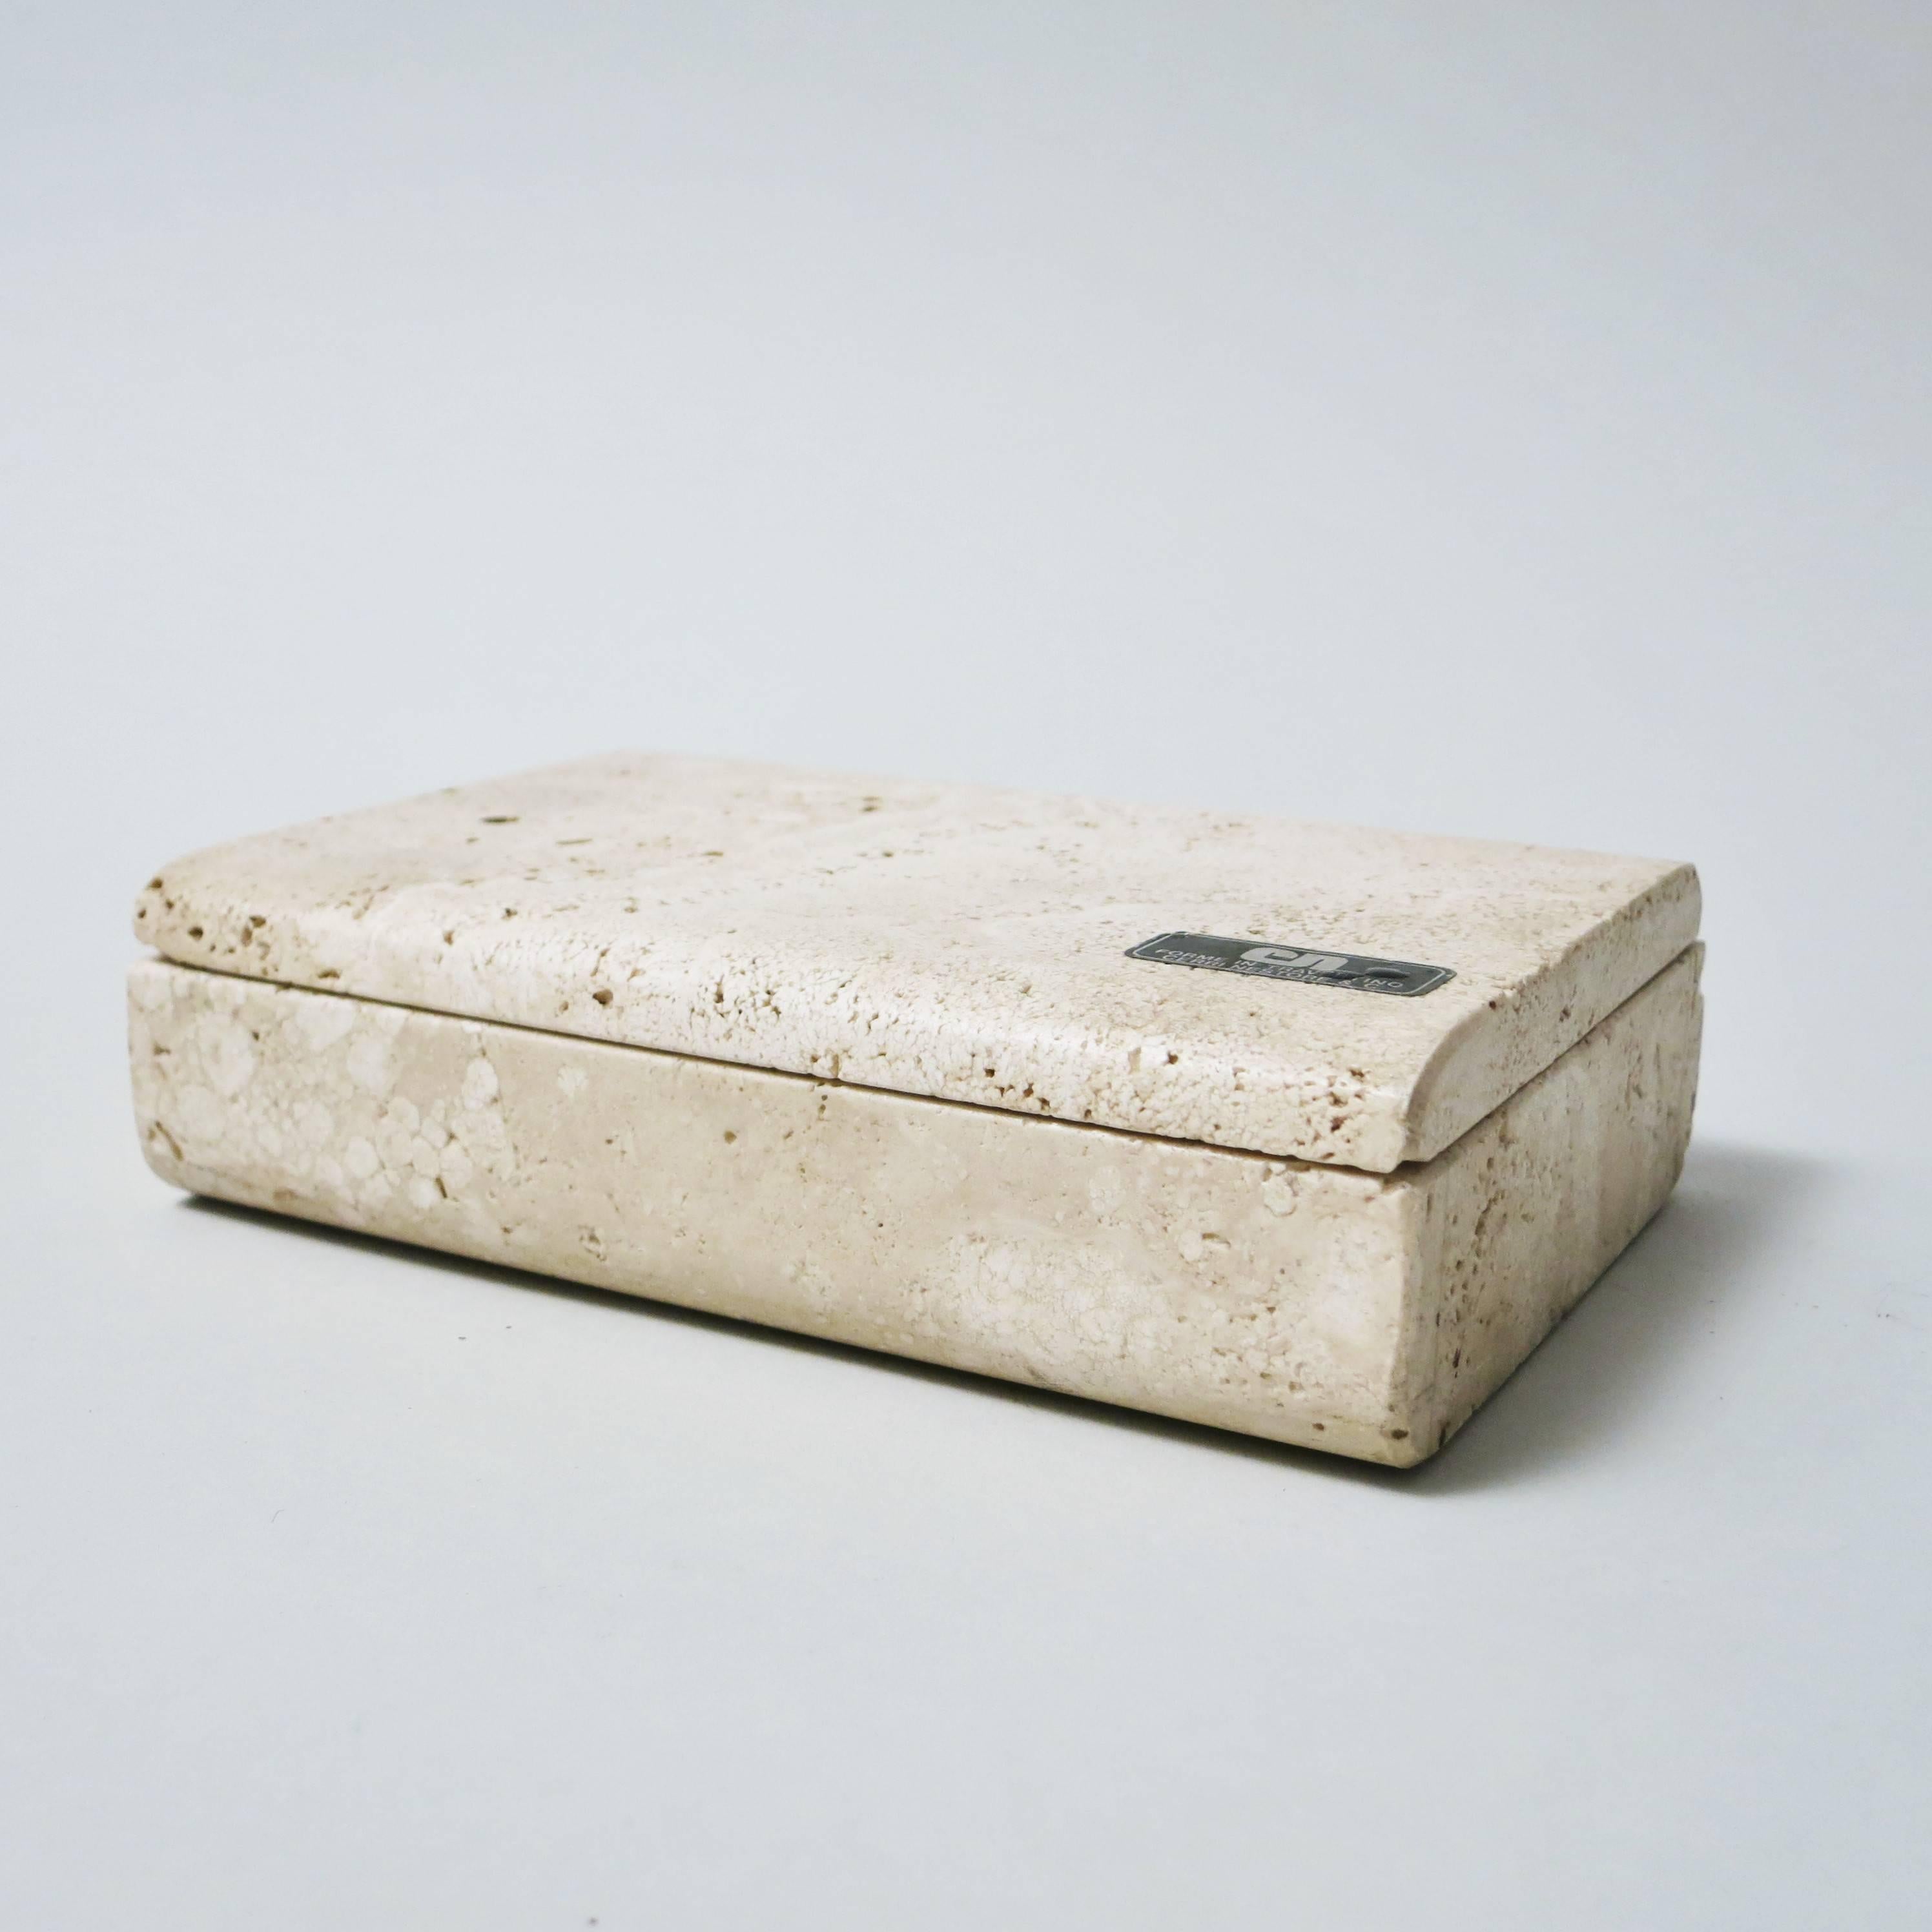 Mid-Century Modernist rectangular box in travertine designed by Cerri Nestore in Volterra, Italy, circa 1970. Labelled by maker on both parts.